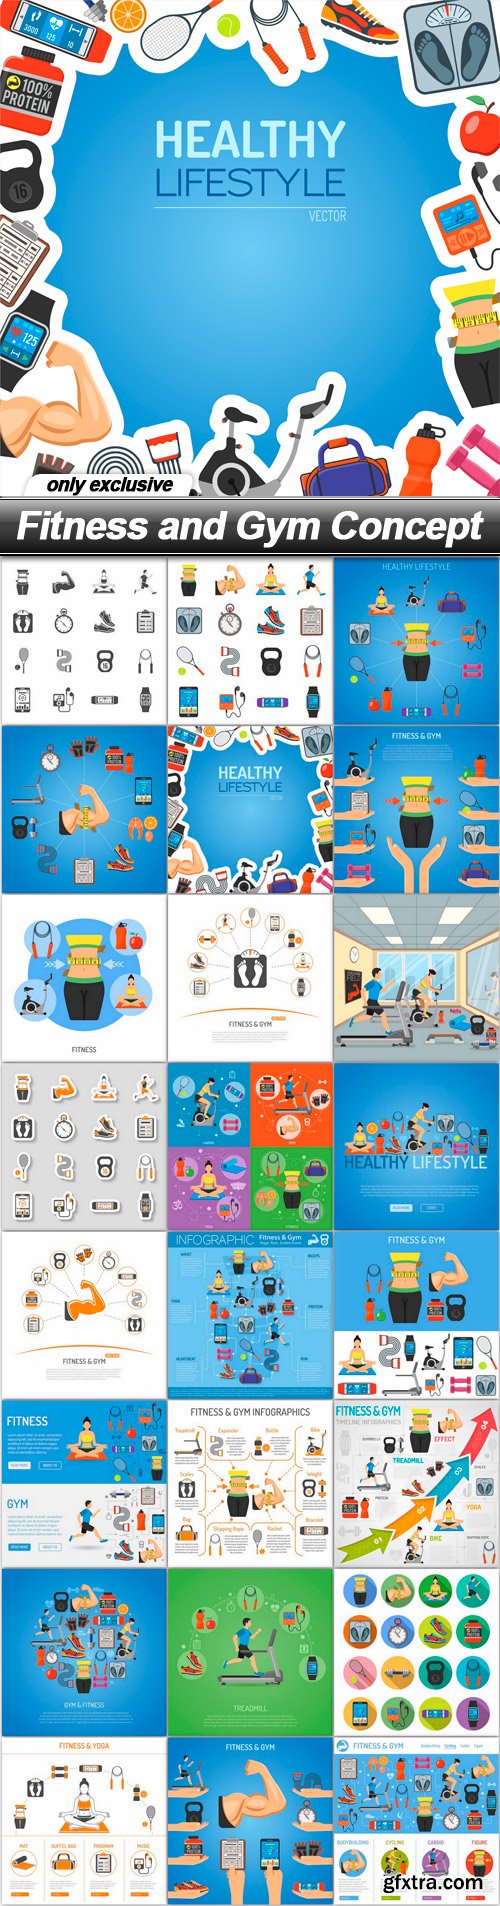 Fitness and Gym Concept - 24 EPS